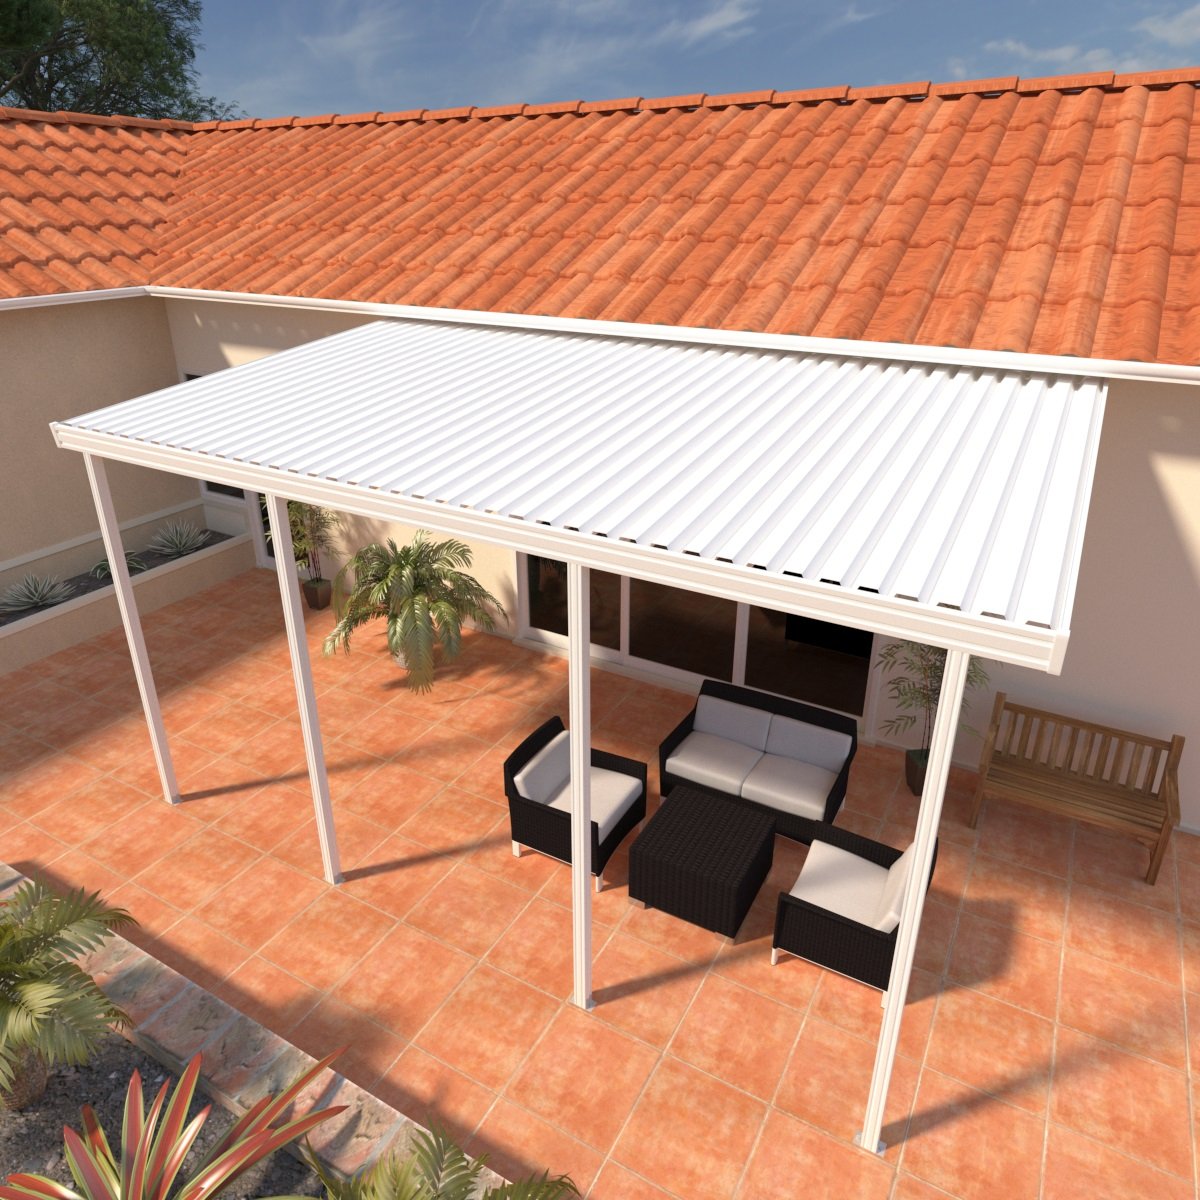 08 ft. Deep x 30 ft. Wide White Attached Aluminum Patio Cover -4 Posts - (10lb Low Snow Area)